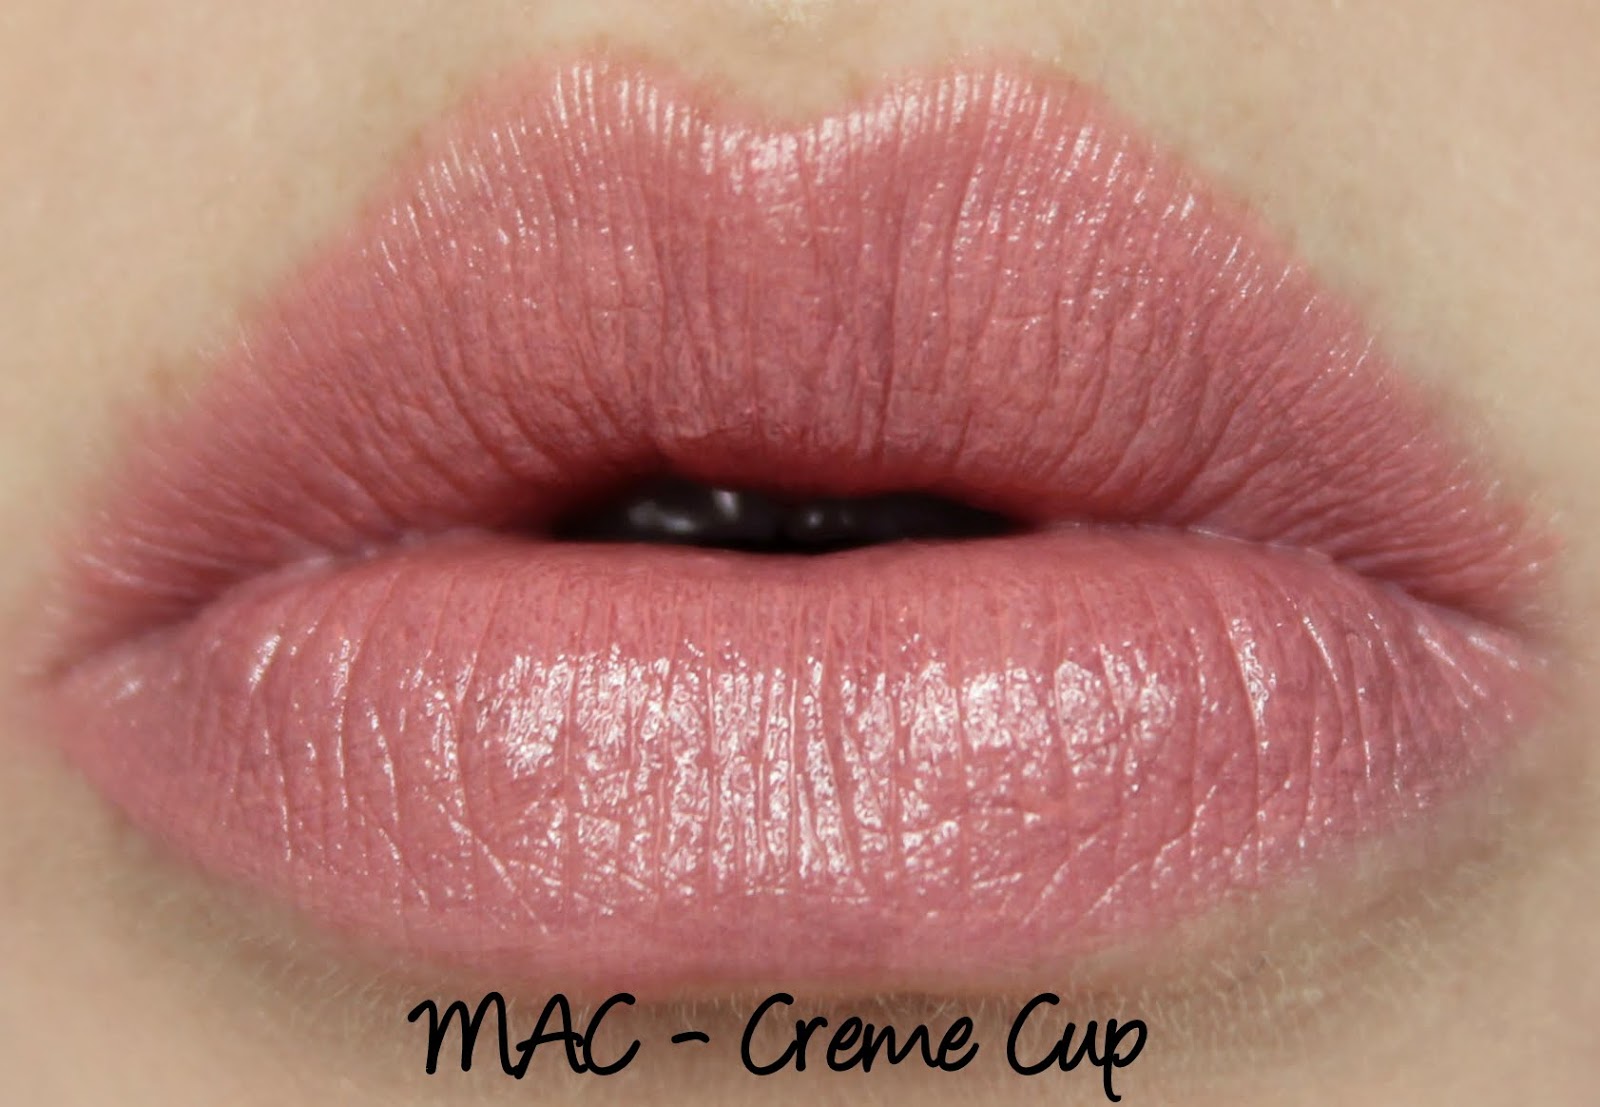 MAC Creme Cup Lipstick - Swatches & Review